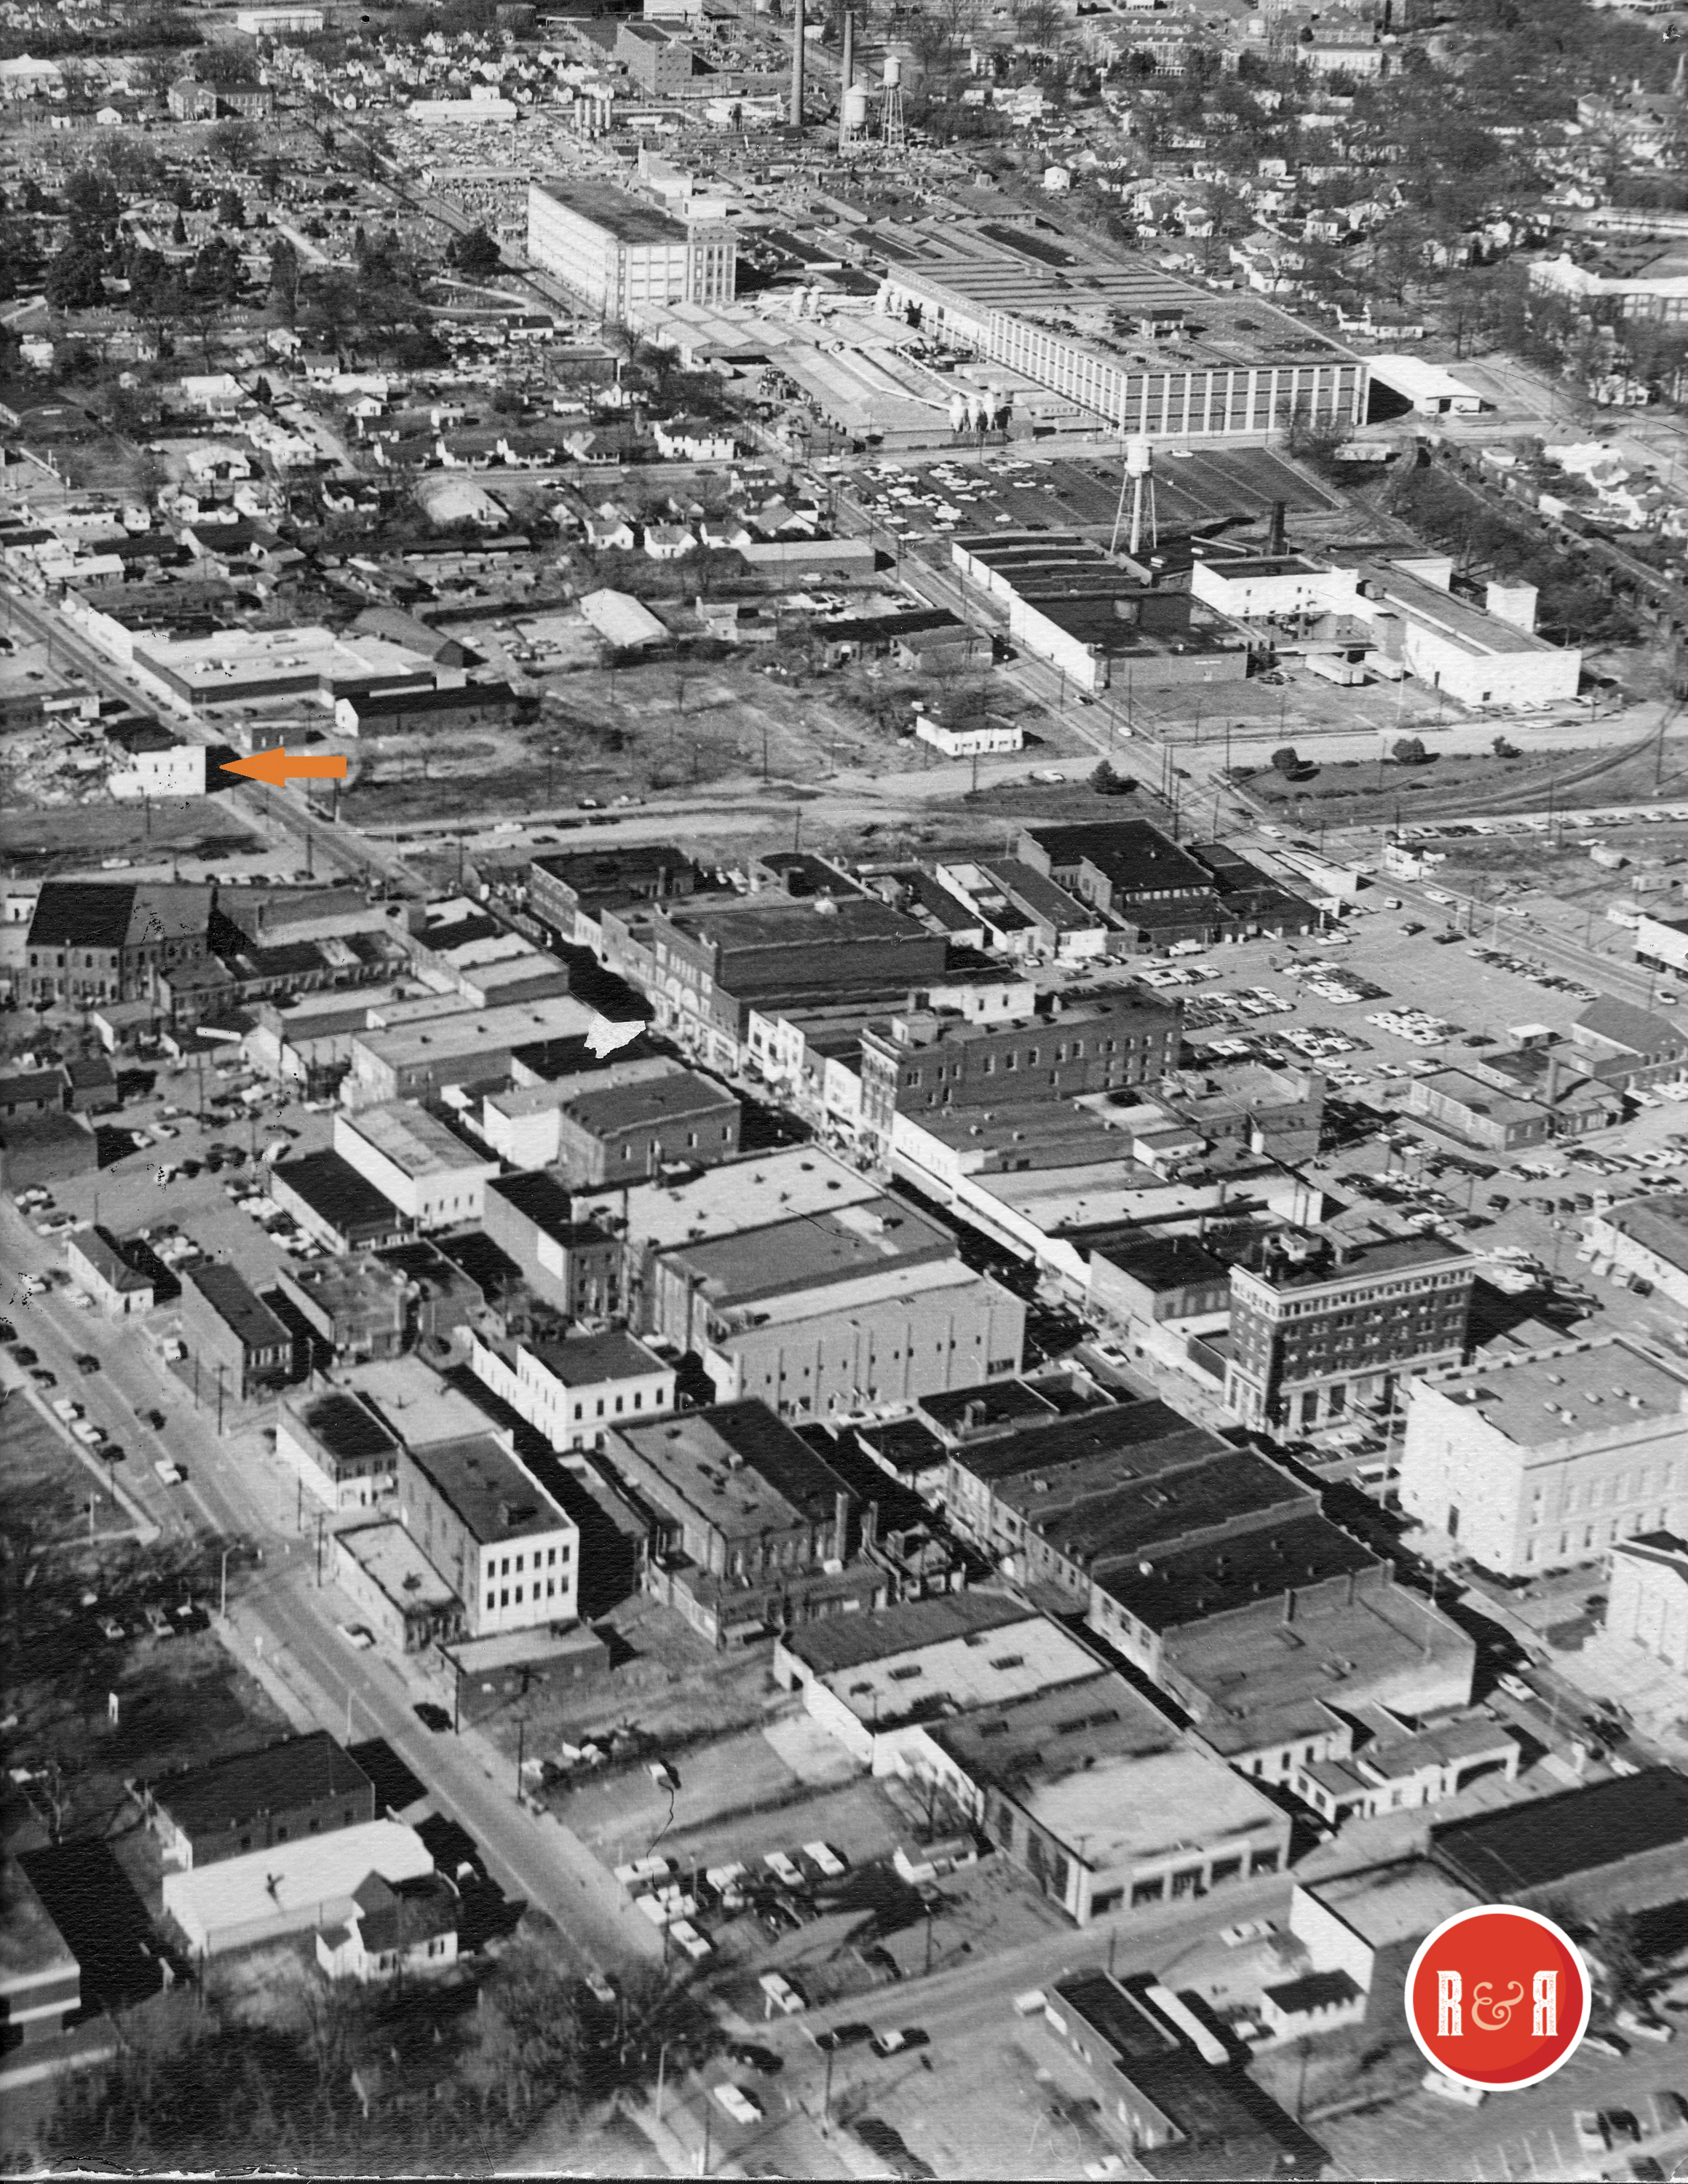 AERIAL OF THE MARSHALL BARN - OIL CO LOCATION